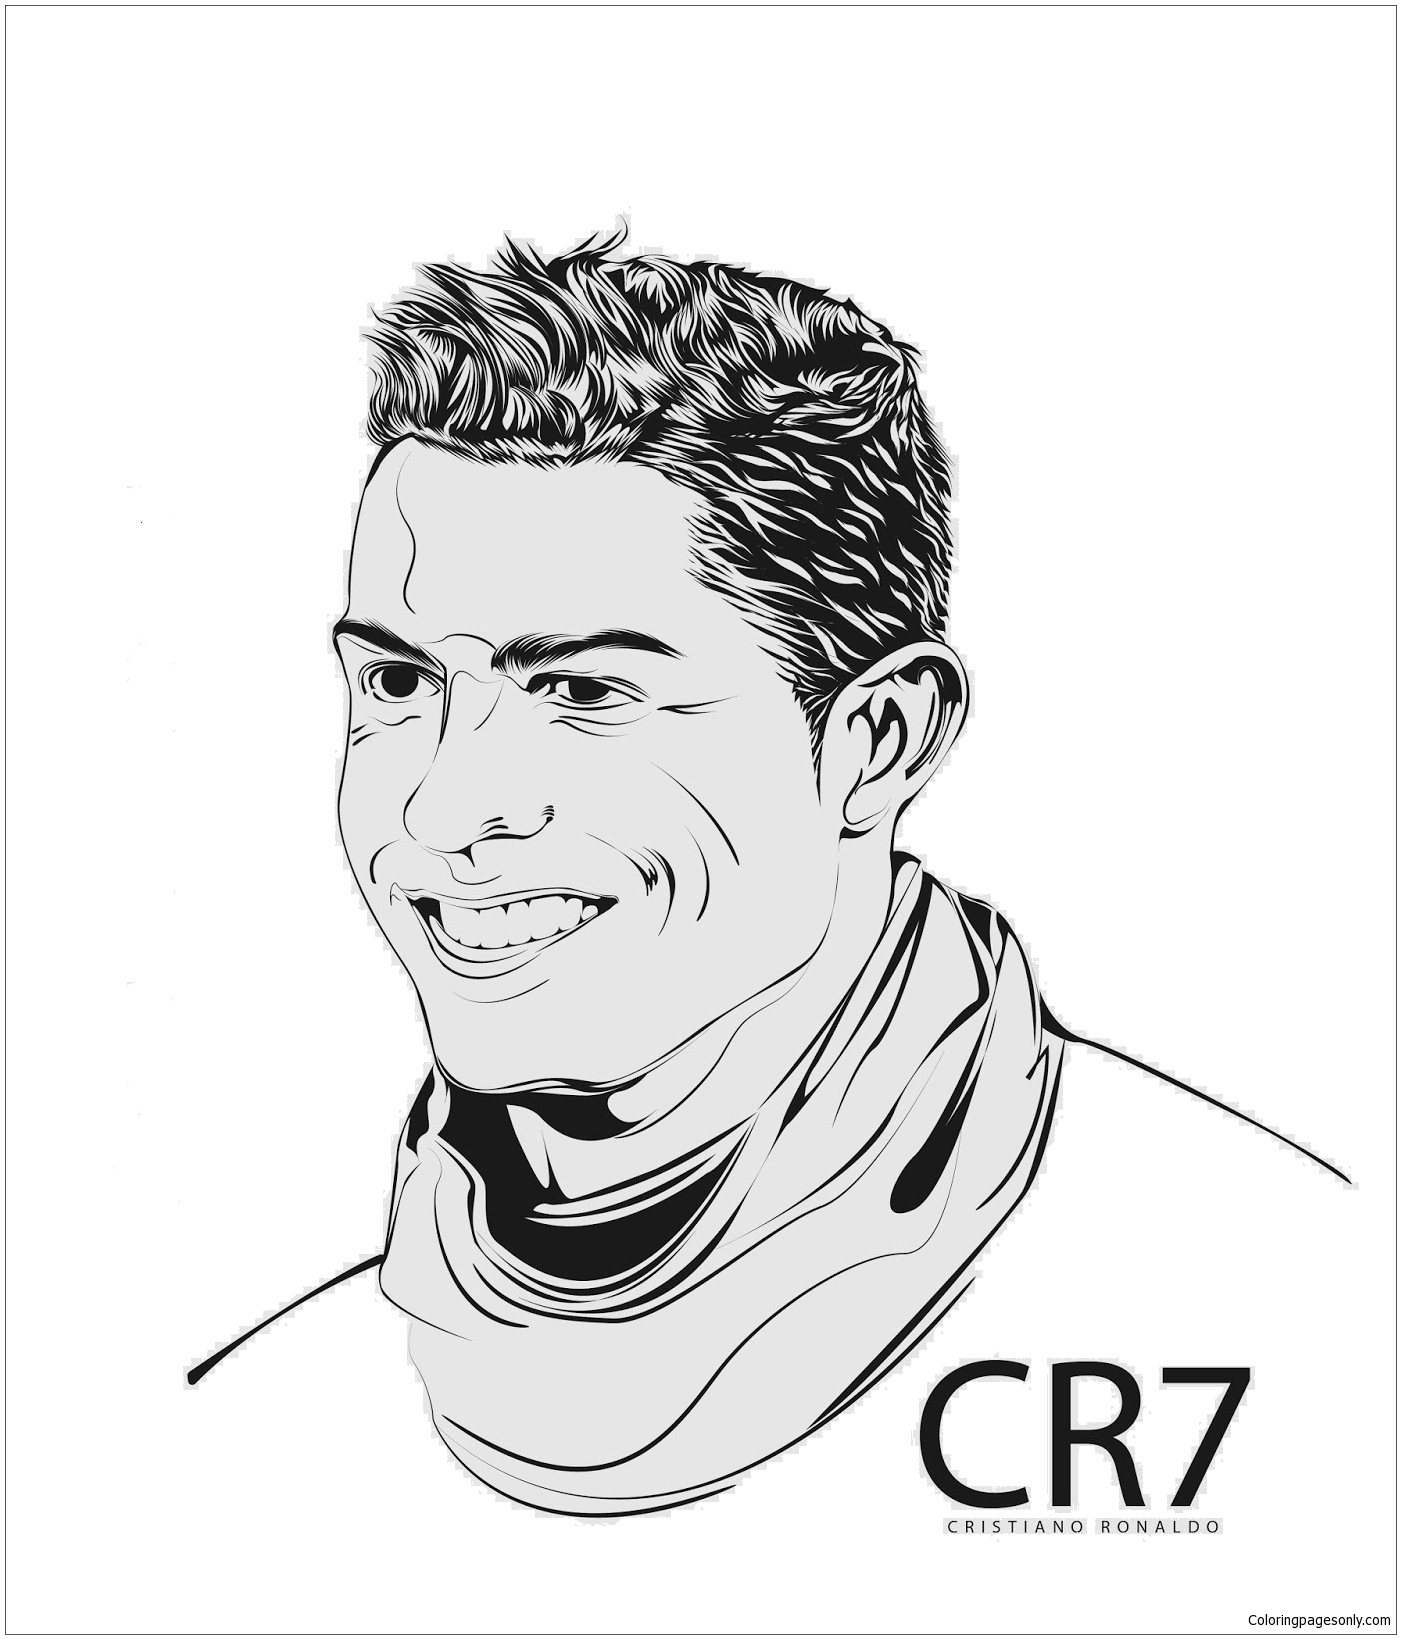 Cristiano Ronaldoimage 8 Coloring Page Free Coloring Pages Online